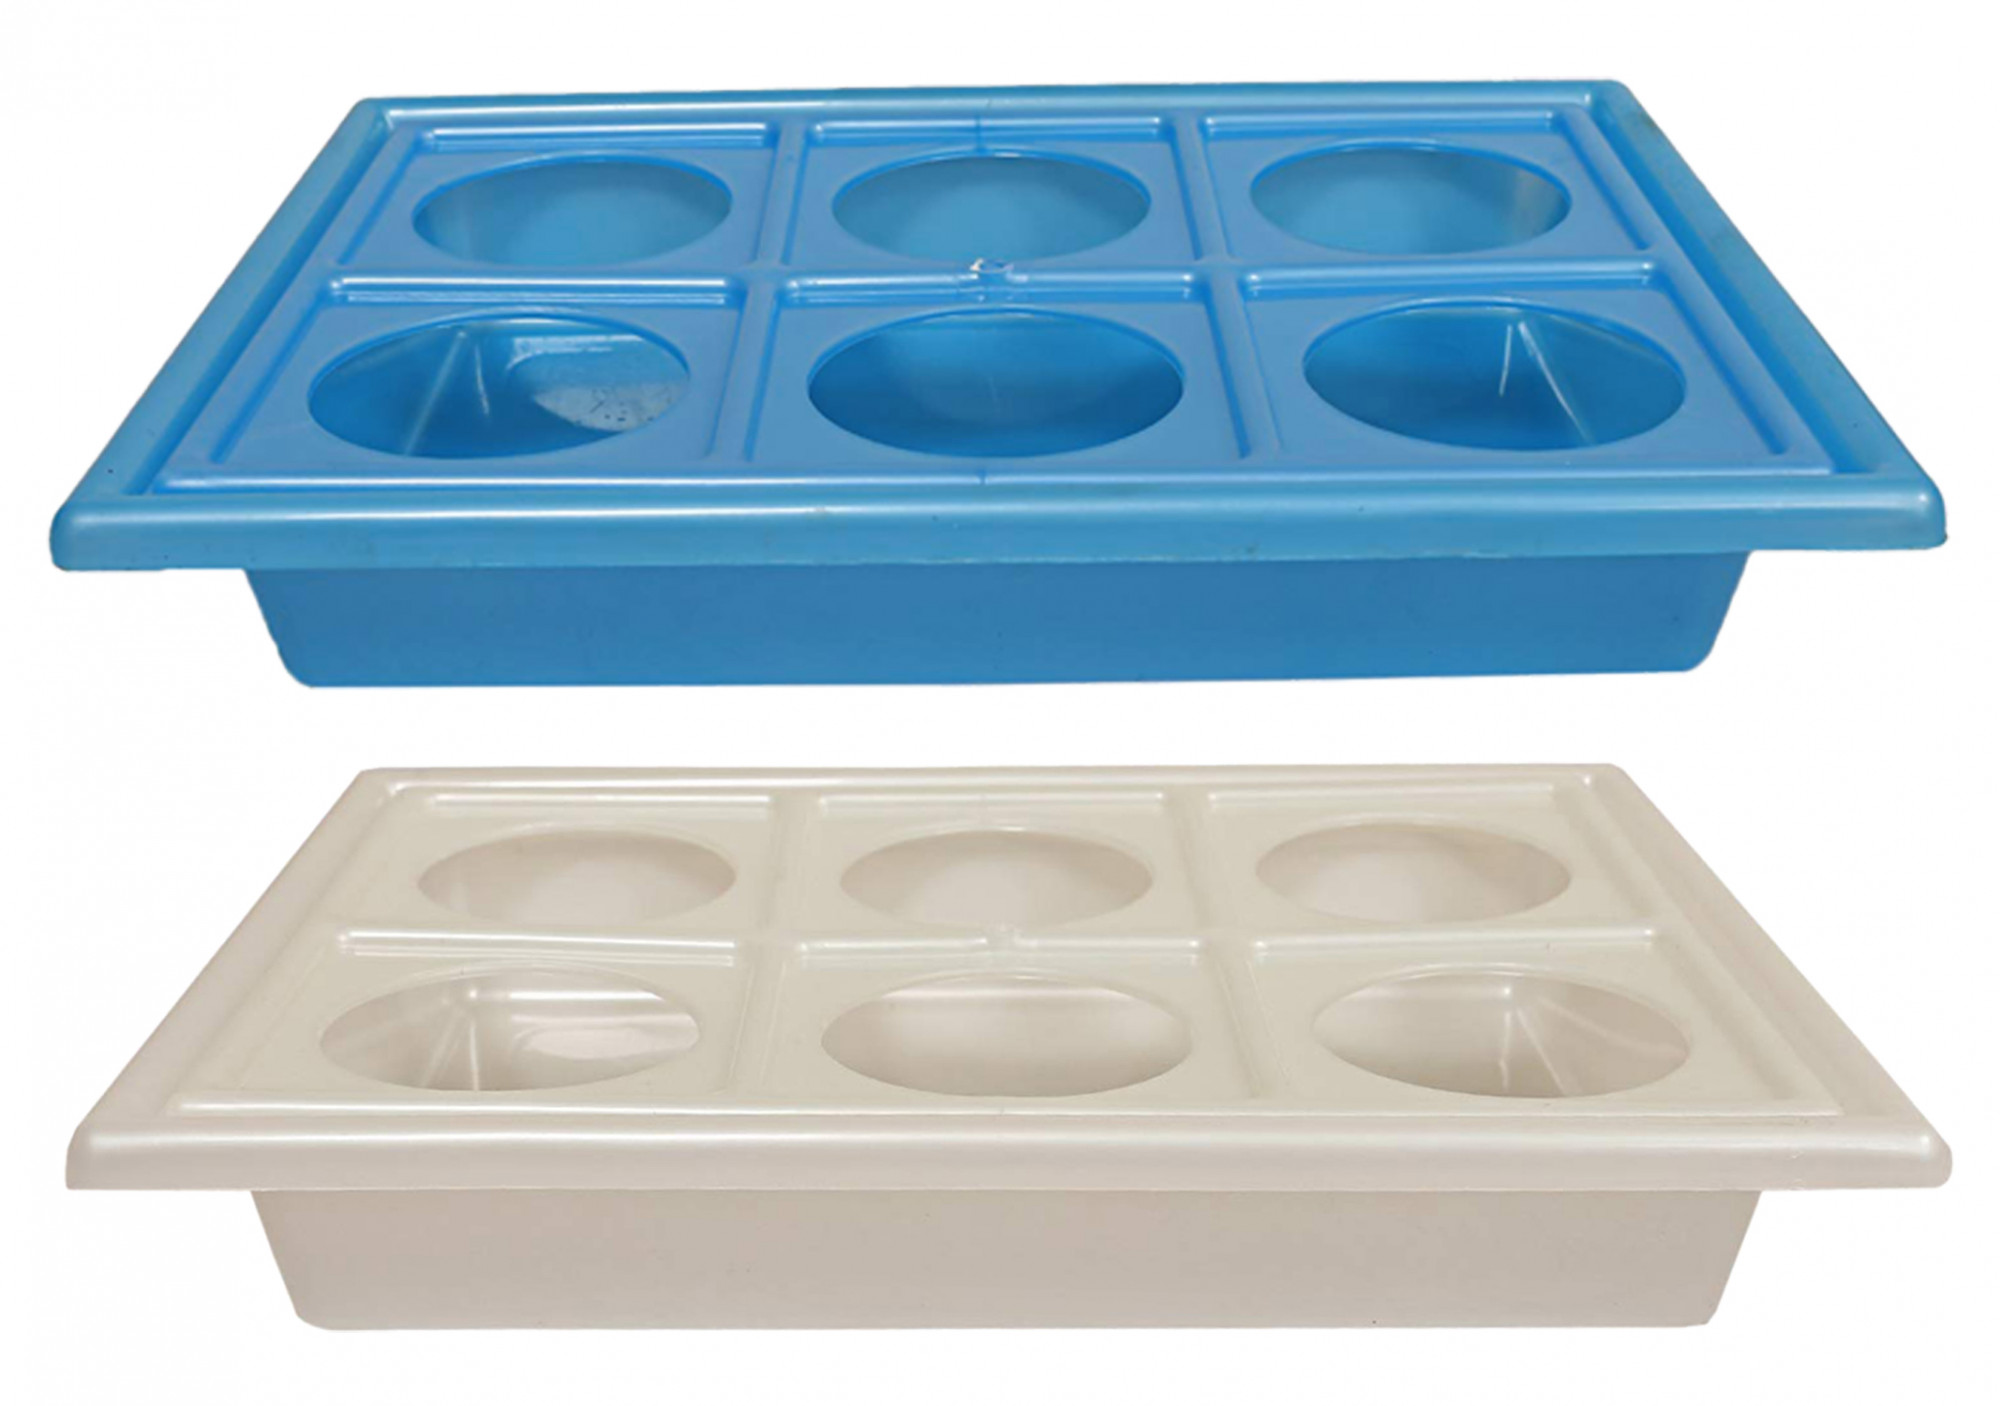 Kuber Industries Tray with Cutout Handles, Cup Display for Kitchenware, Plastic Glass Holder, One Size, 6 Slots-Pack of 2 (Blue & White)